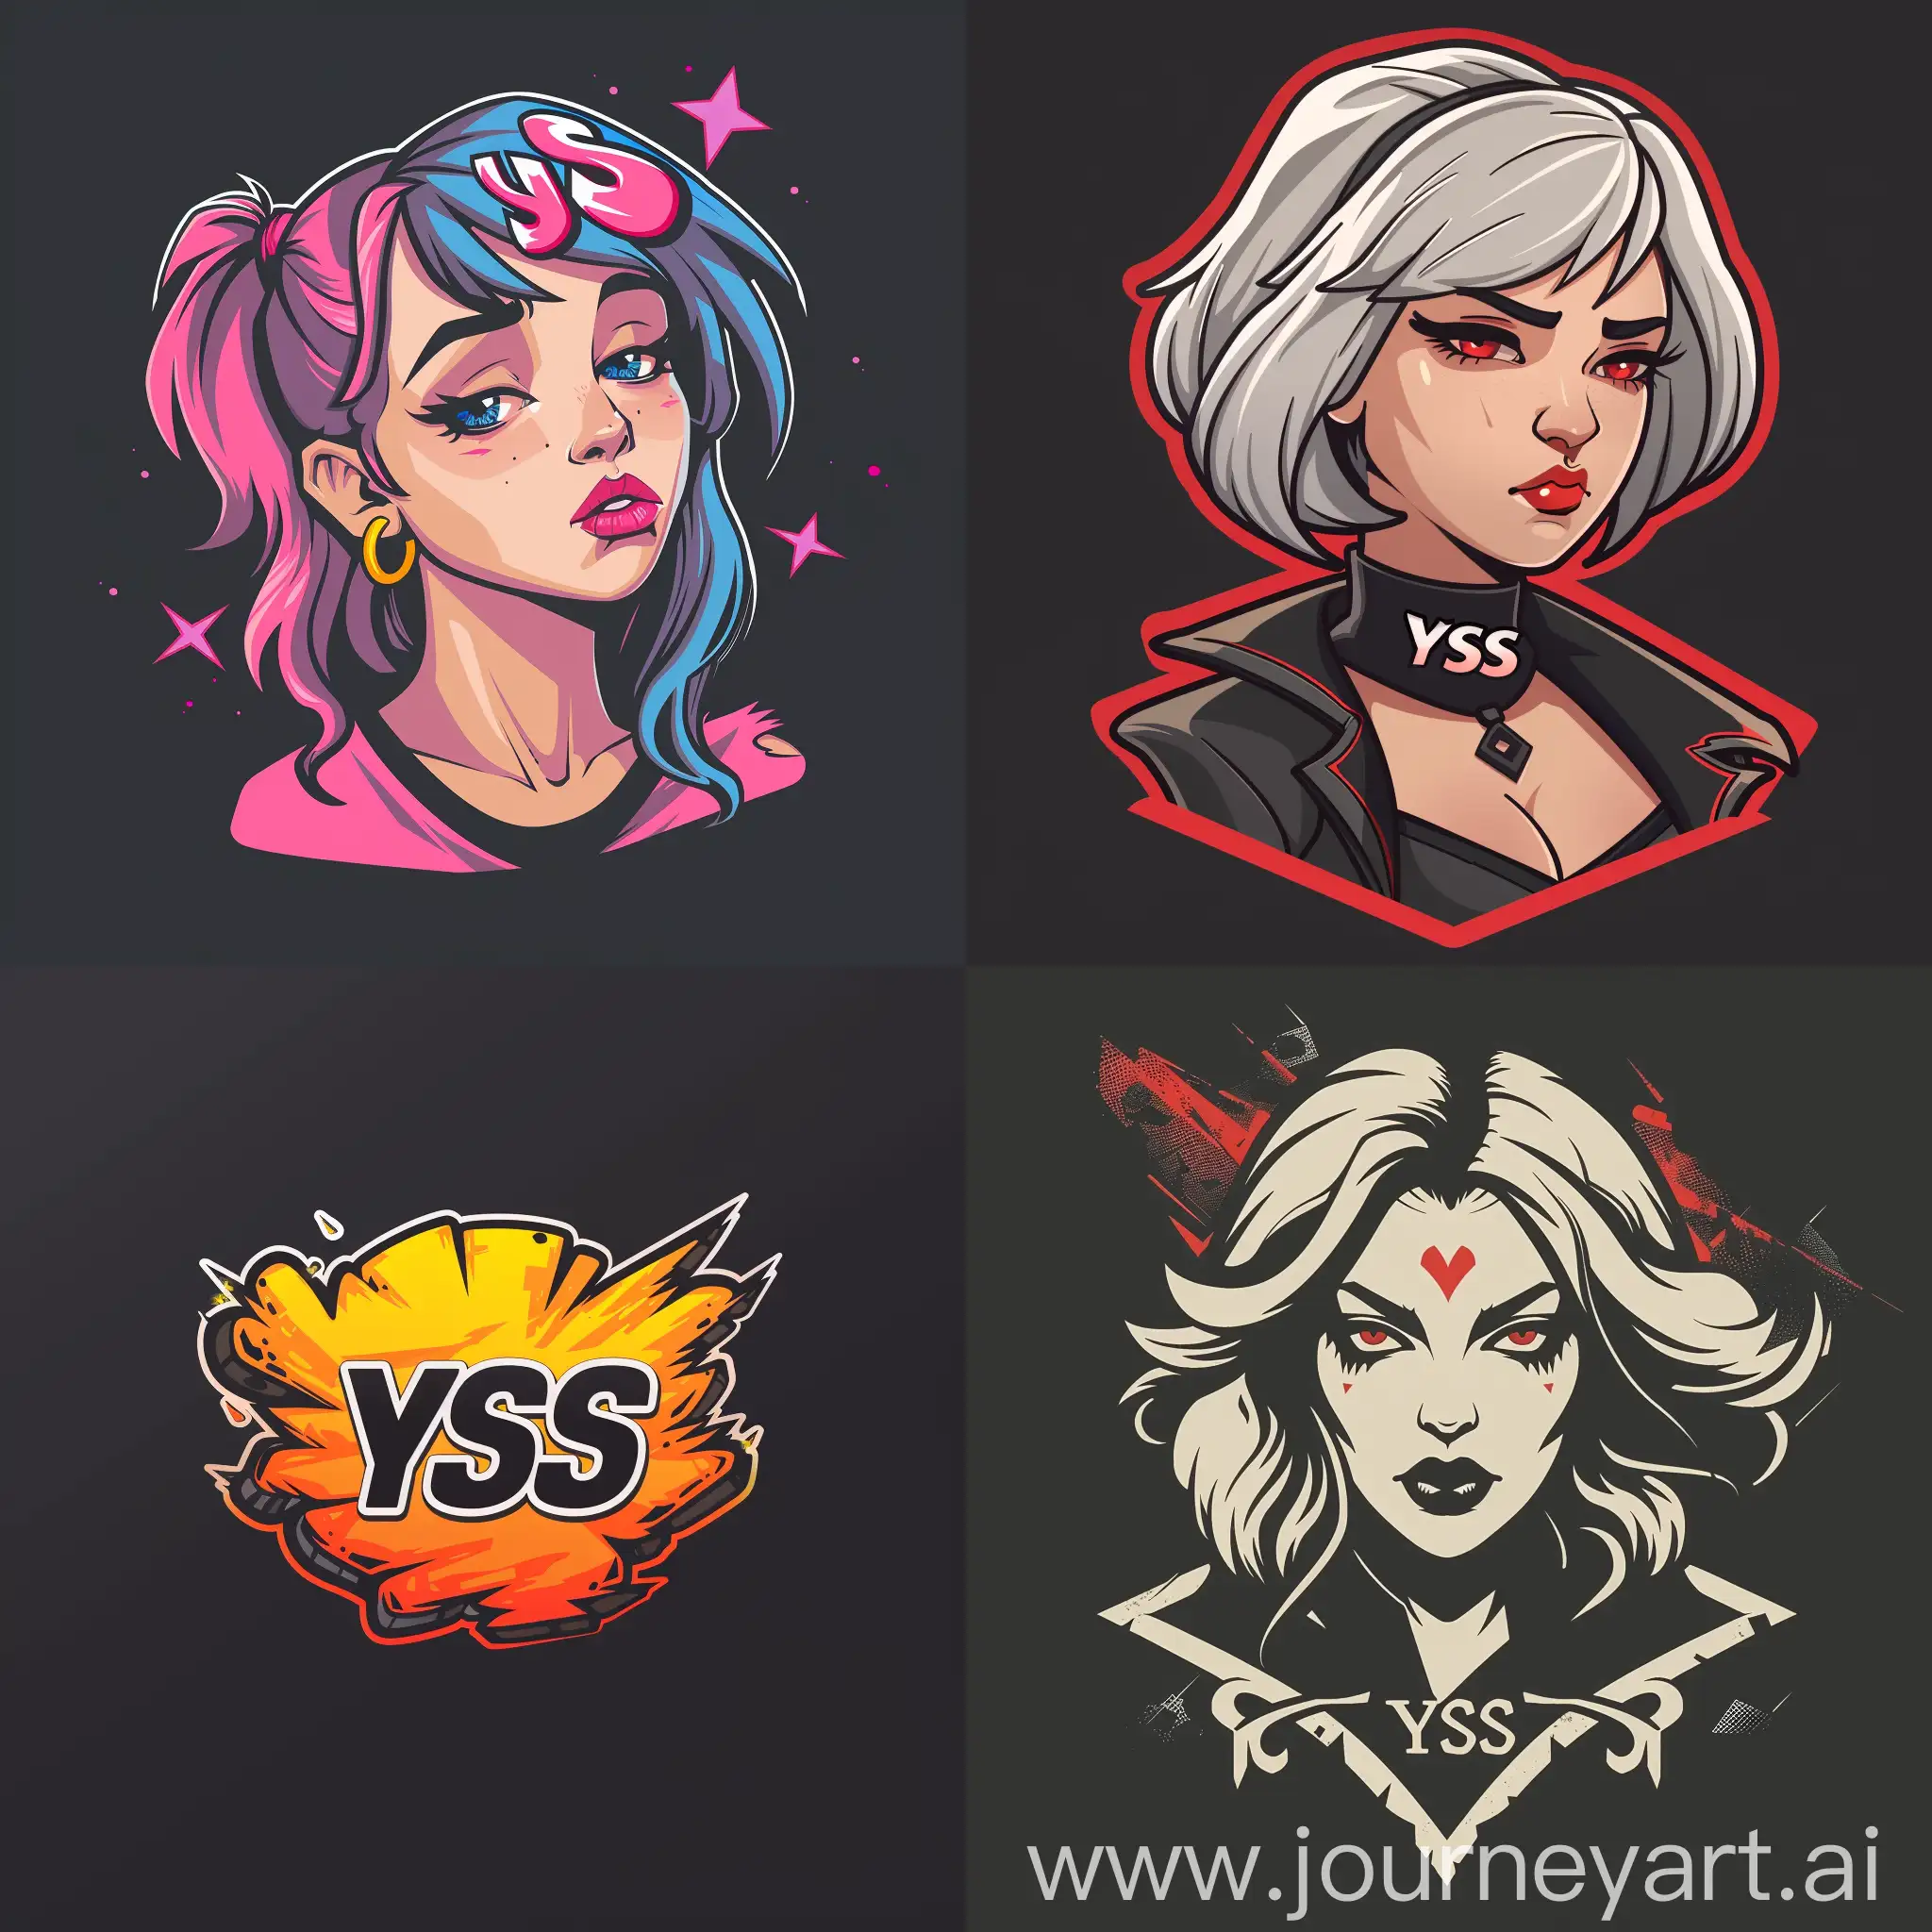 Creative-Game-Logo-Design-YSS-Sad-Sister-in-an-Interesting-Style